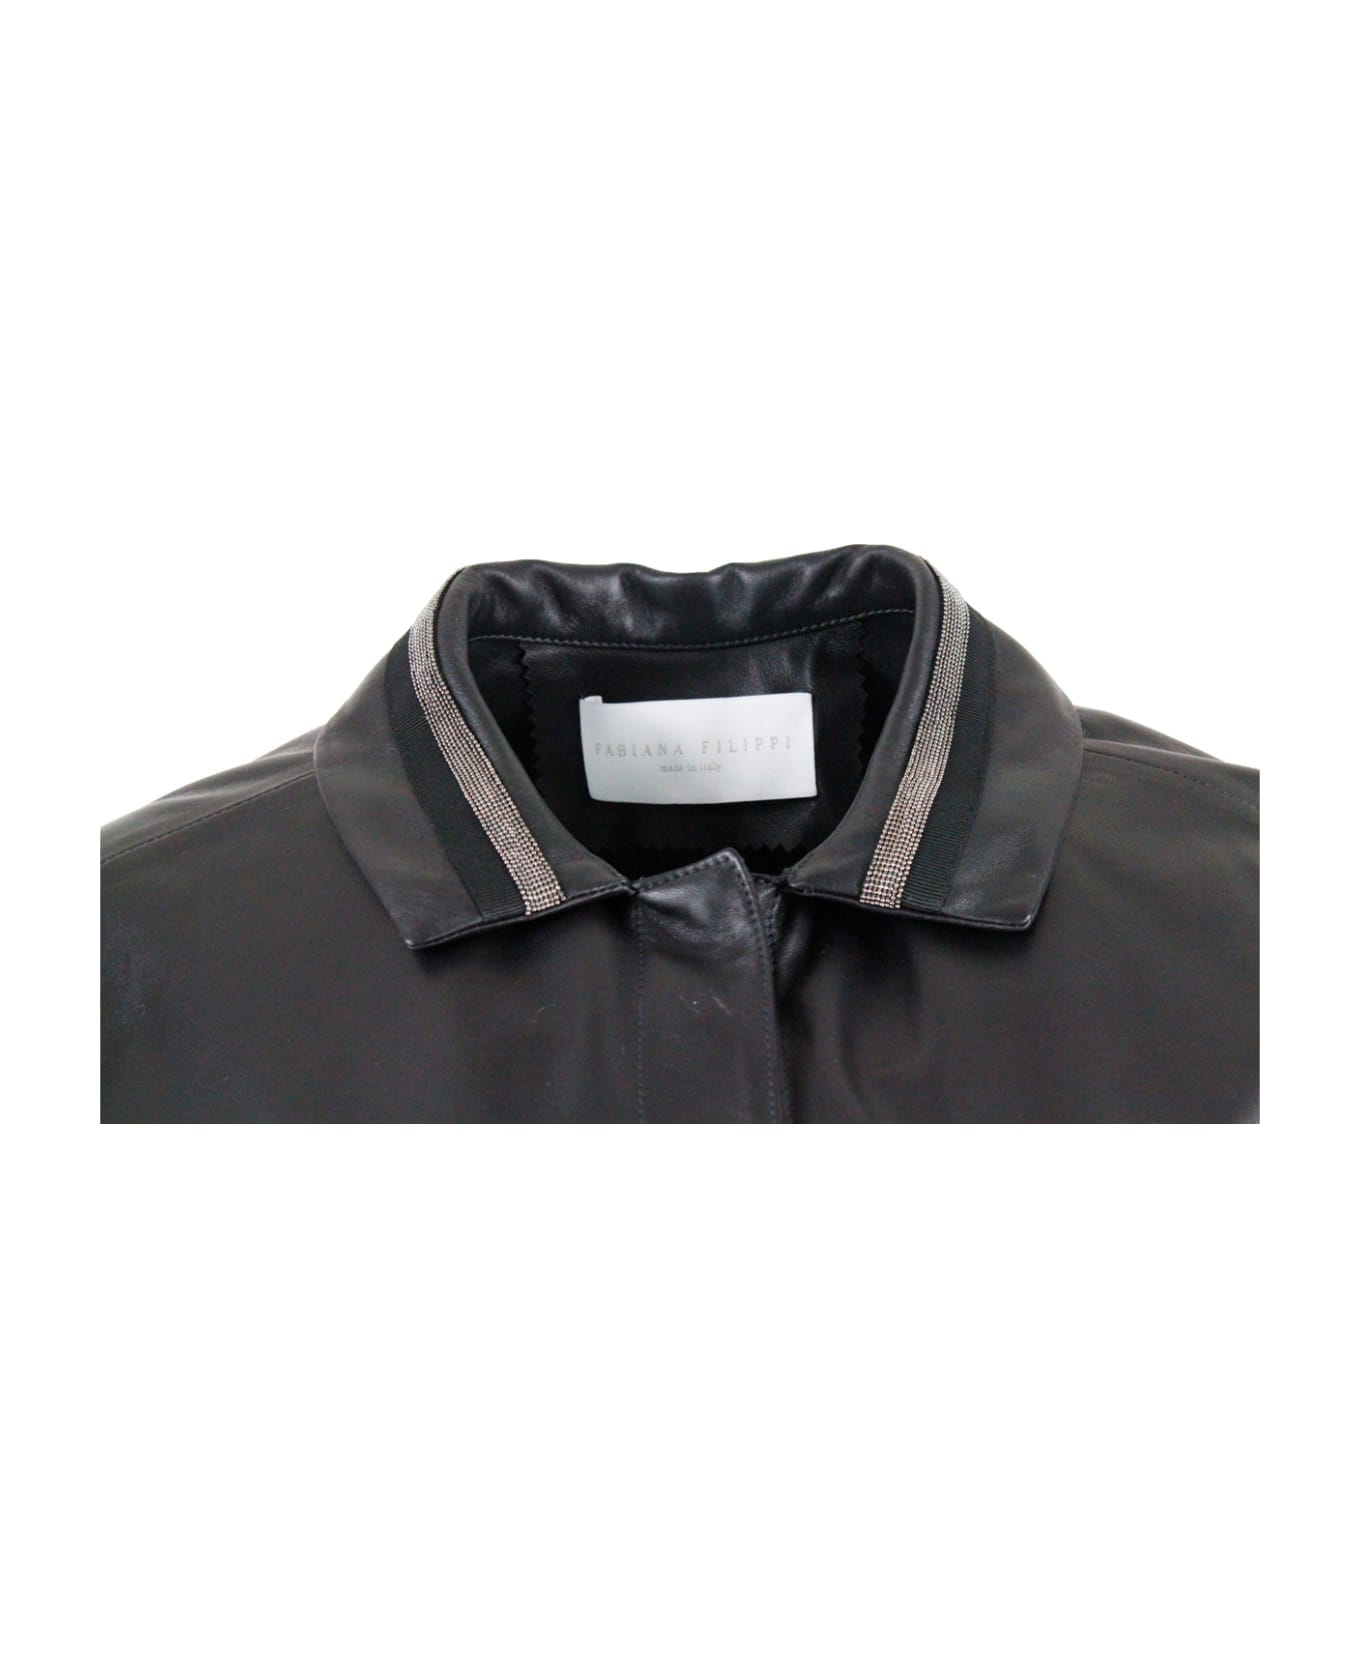 Fabiana Filippi Leather Shirt Jacket With Button Closure, With Belt And With Monile On The Collar - Black